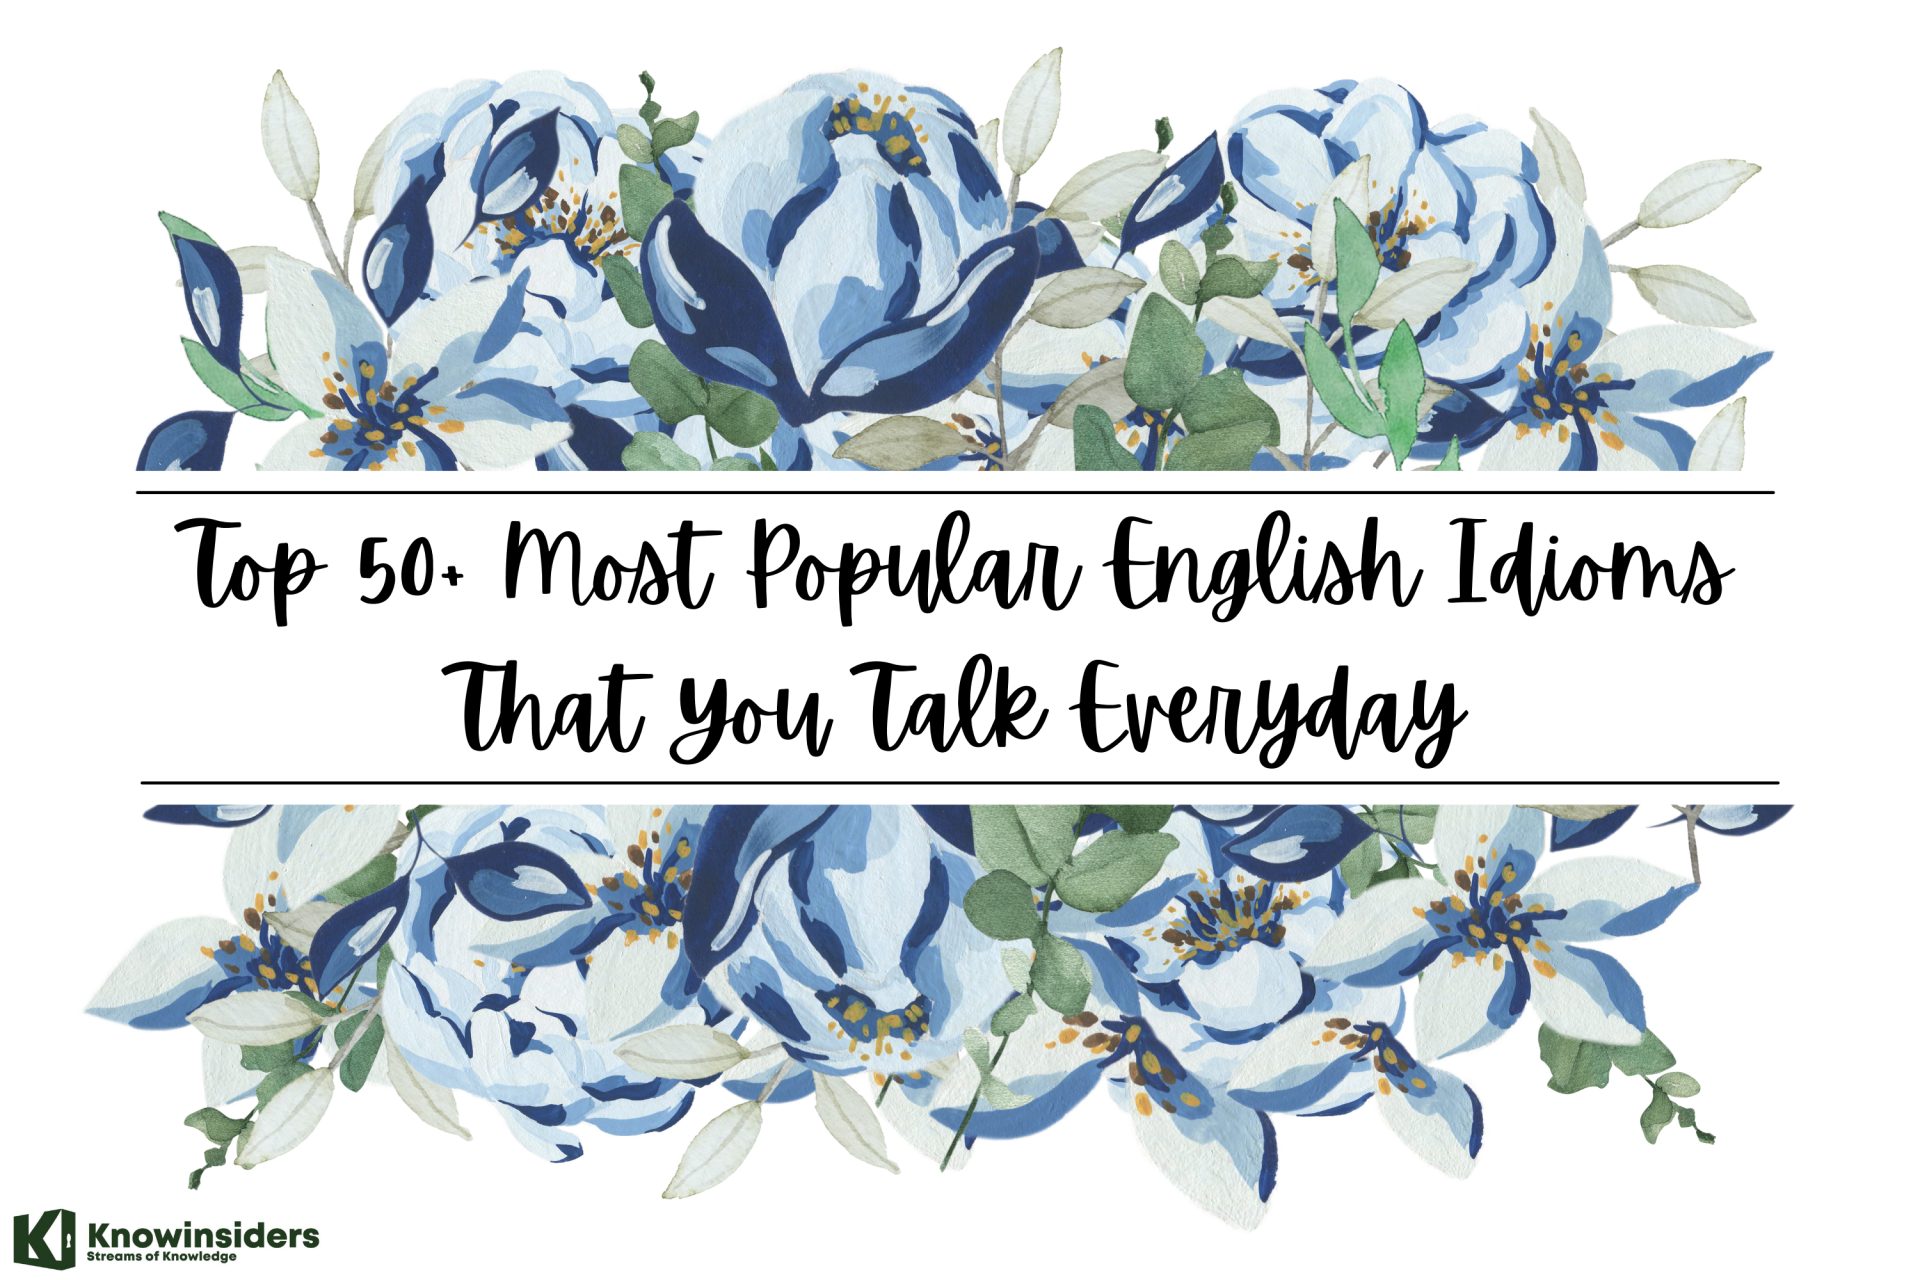 Top 50+ Most Popular English Idioms That You Talk Everyday